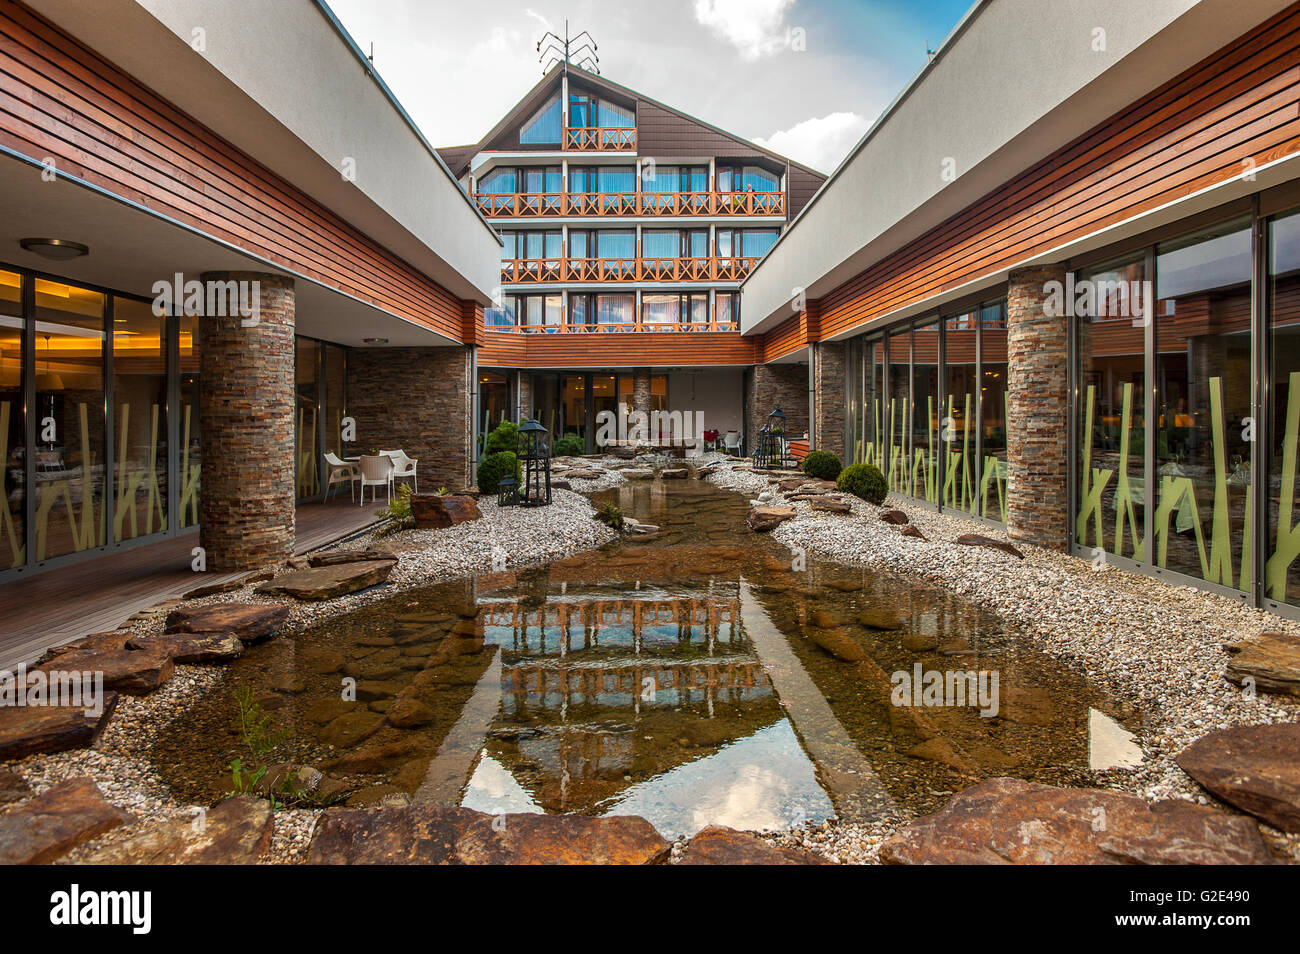 Slovenia Zrece Thermal Complex -garden and hotel built into the structure Stock Photo